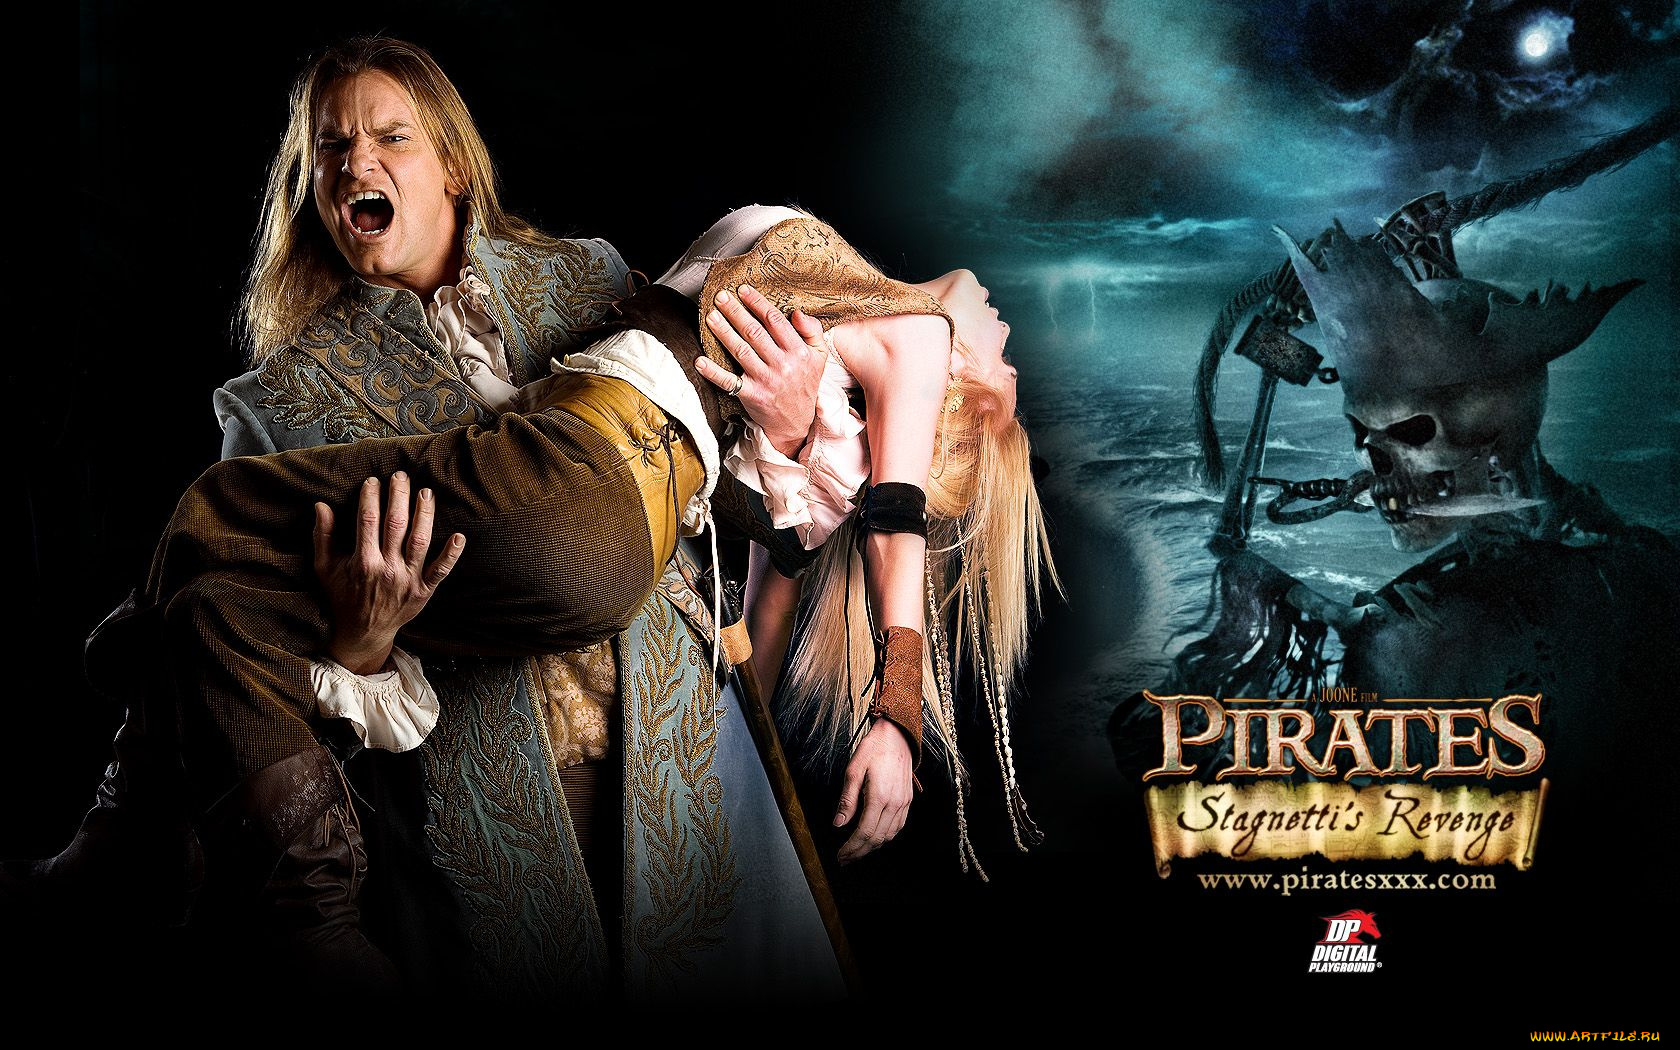 Pirates the revenge of stagnetti watch online